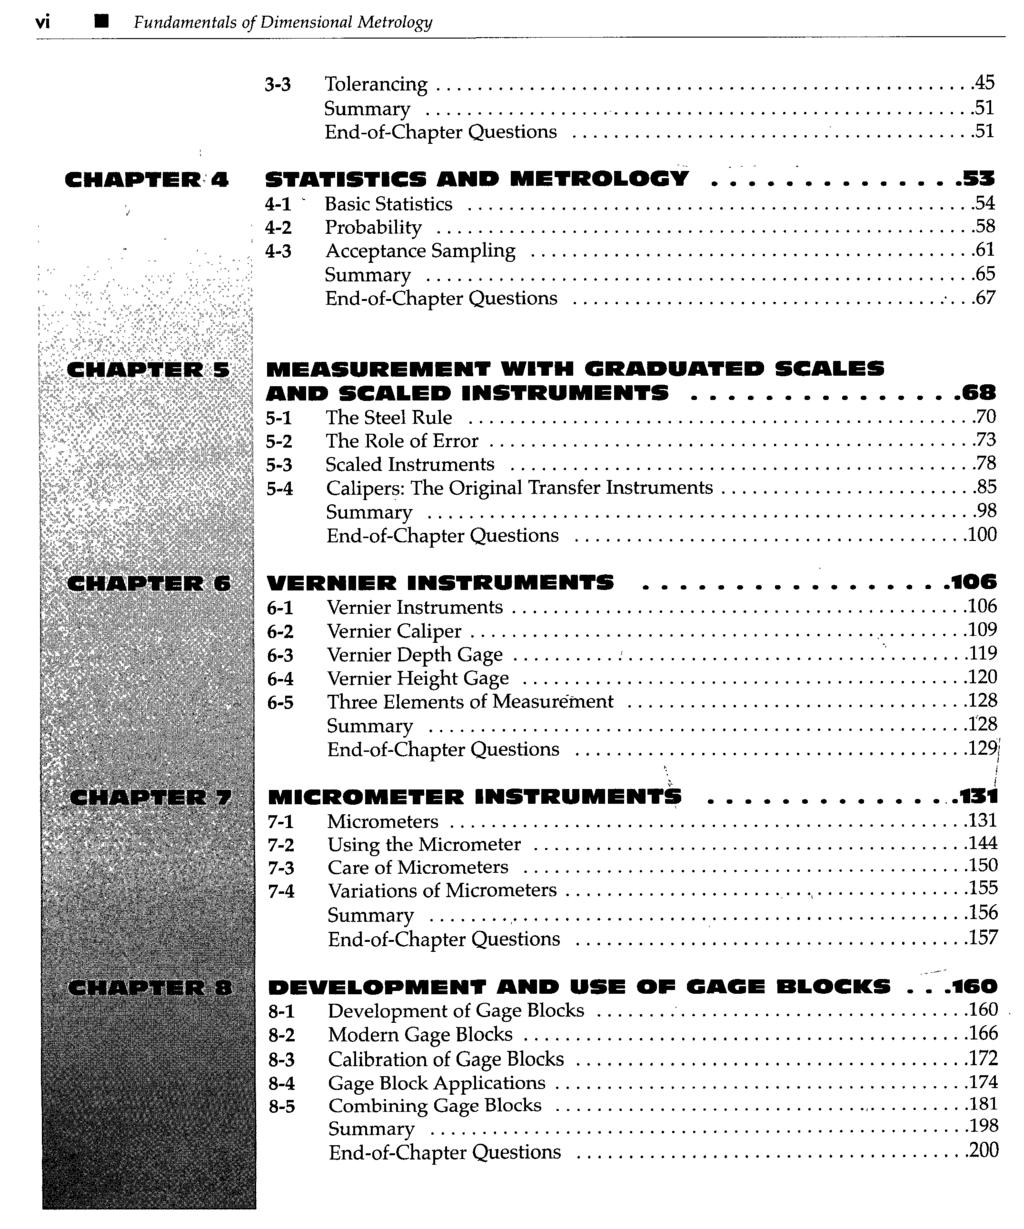 VI Fundamentals of Dimensional Metrology 3-3 Tolerancing 45 Summary 51 End-of-Chapter Questions 51 CHAPTER 4 STATISTICS AND METROLOGY 4-1 * Basic Statistics 54 4-2 Probability 58 4-3 Acceptance